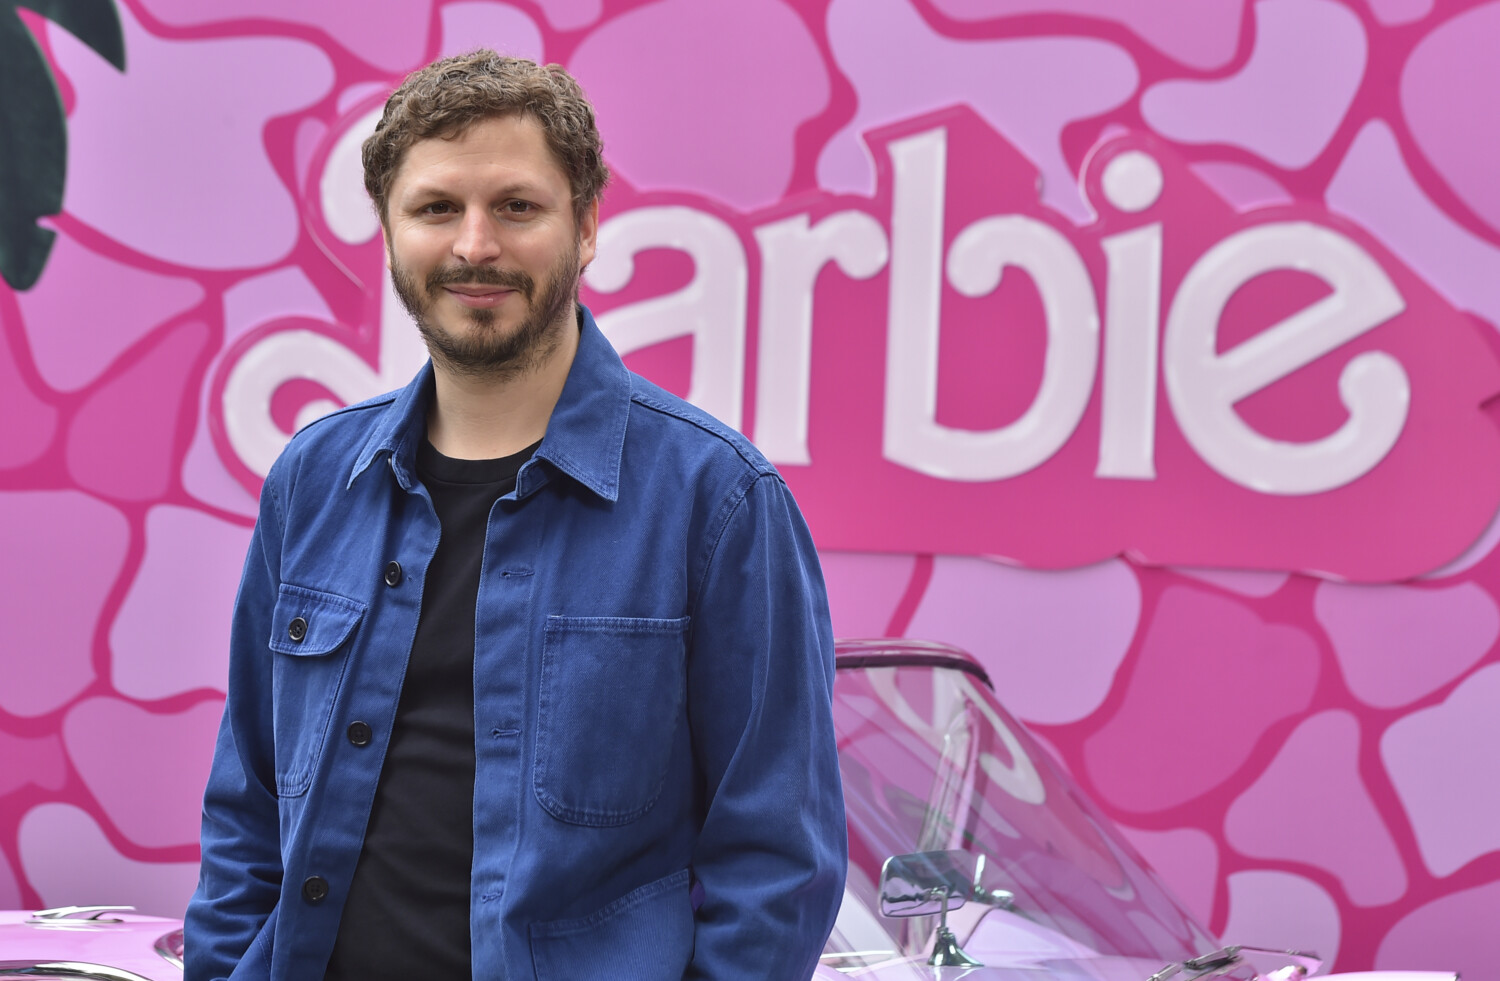 Michael Cera at photo call for Barbie movie